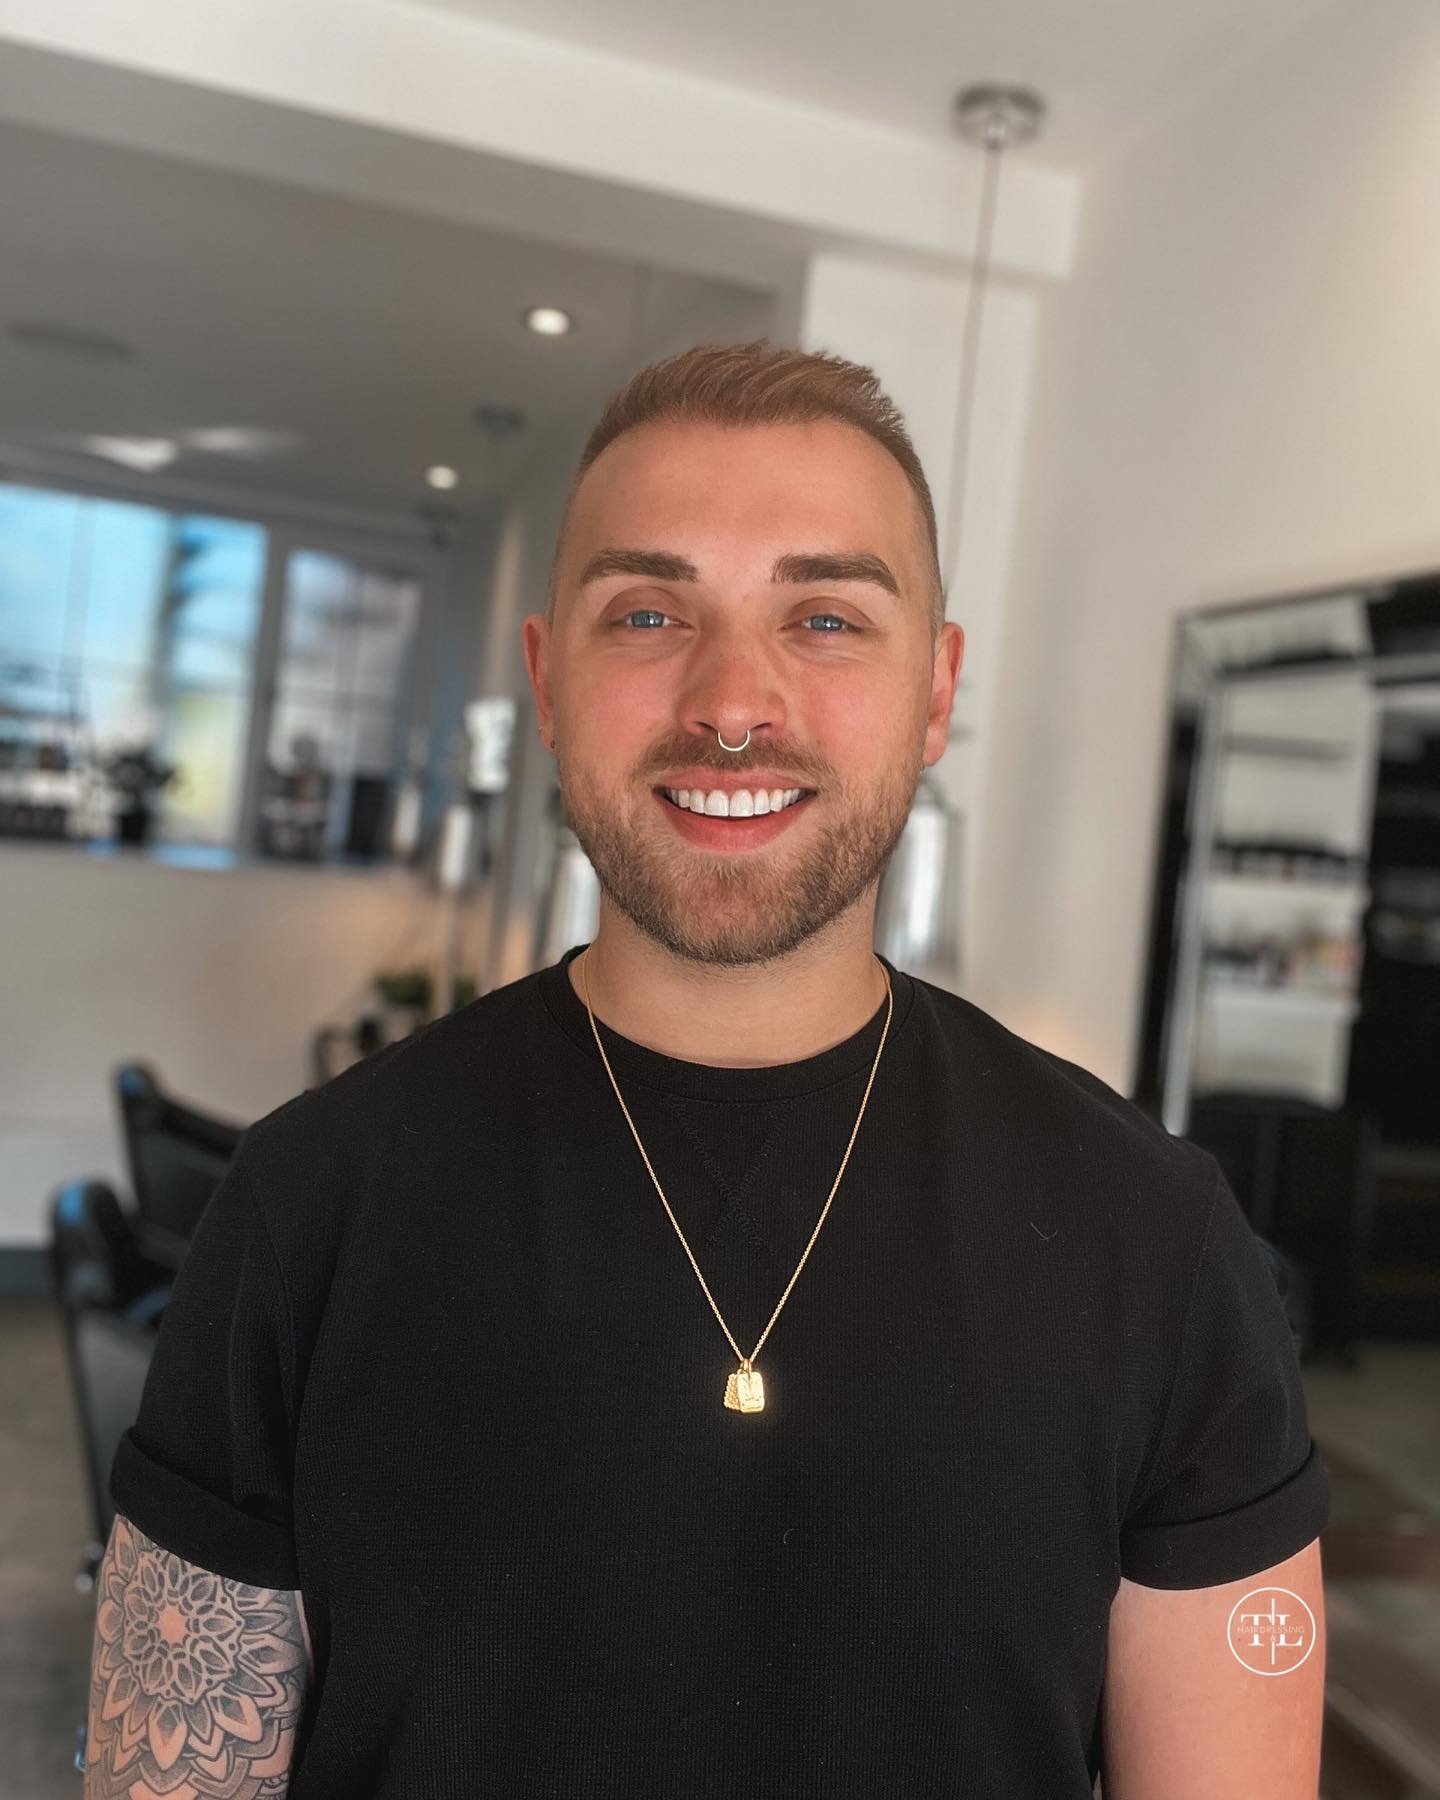 MEET THE TEAM 💕

Will - Director 

Will brings the Lamb here at T&amp;L Hairdressing 🐑
With 13 years in the industry he definitely knows a thing or 2 about fondling follicles 😉

You may know his fur baby Margot, she&rsquo;s the PAWfect salon addit